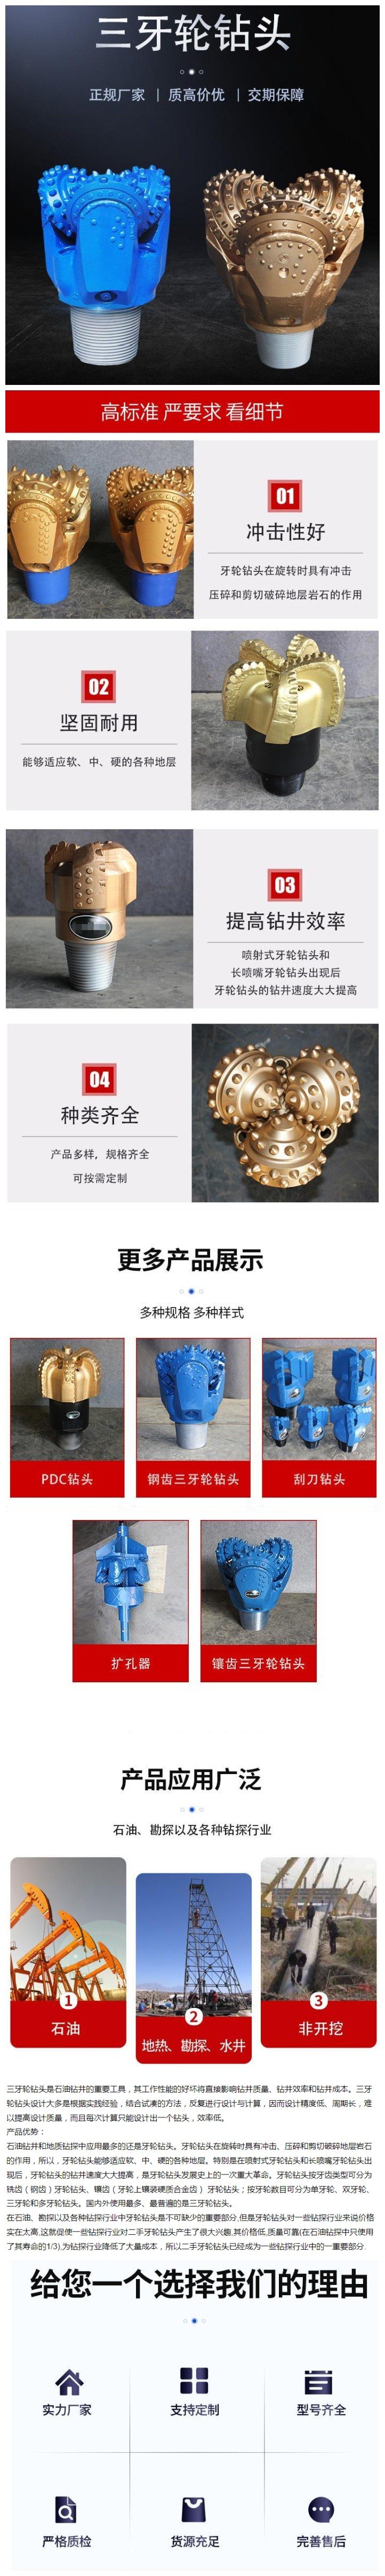 Konos 15 1/2 inch water well drilling rig, drilling cone bit, mining guide hole, rock crushing, efficient and wear-resistant